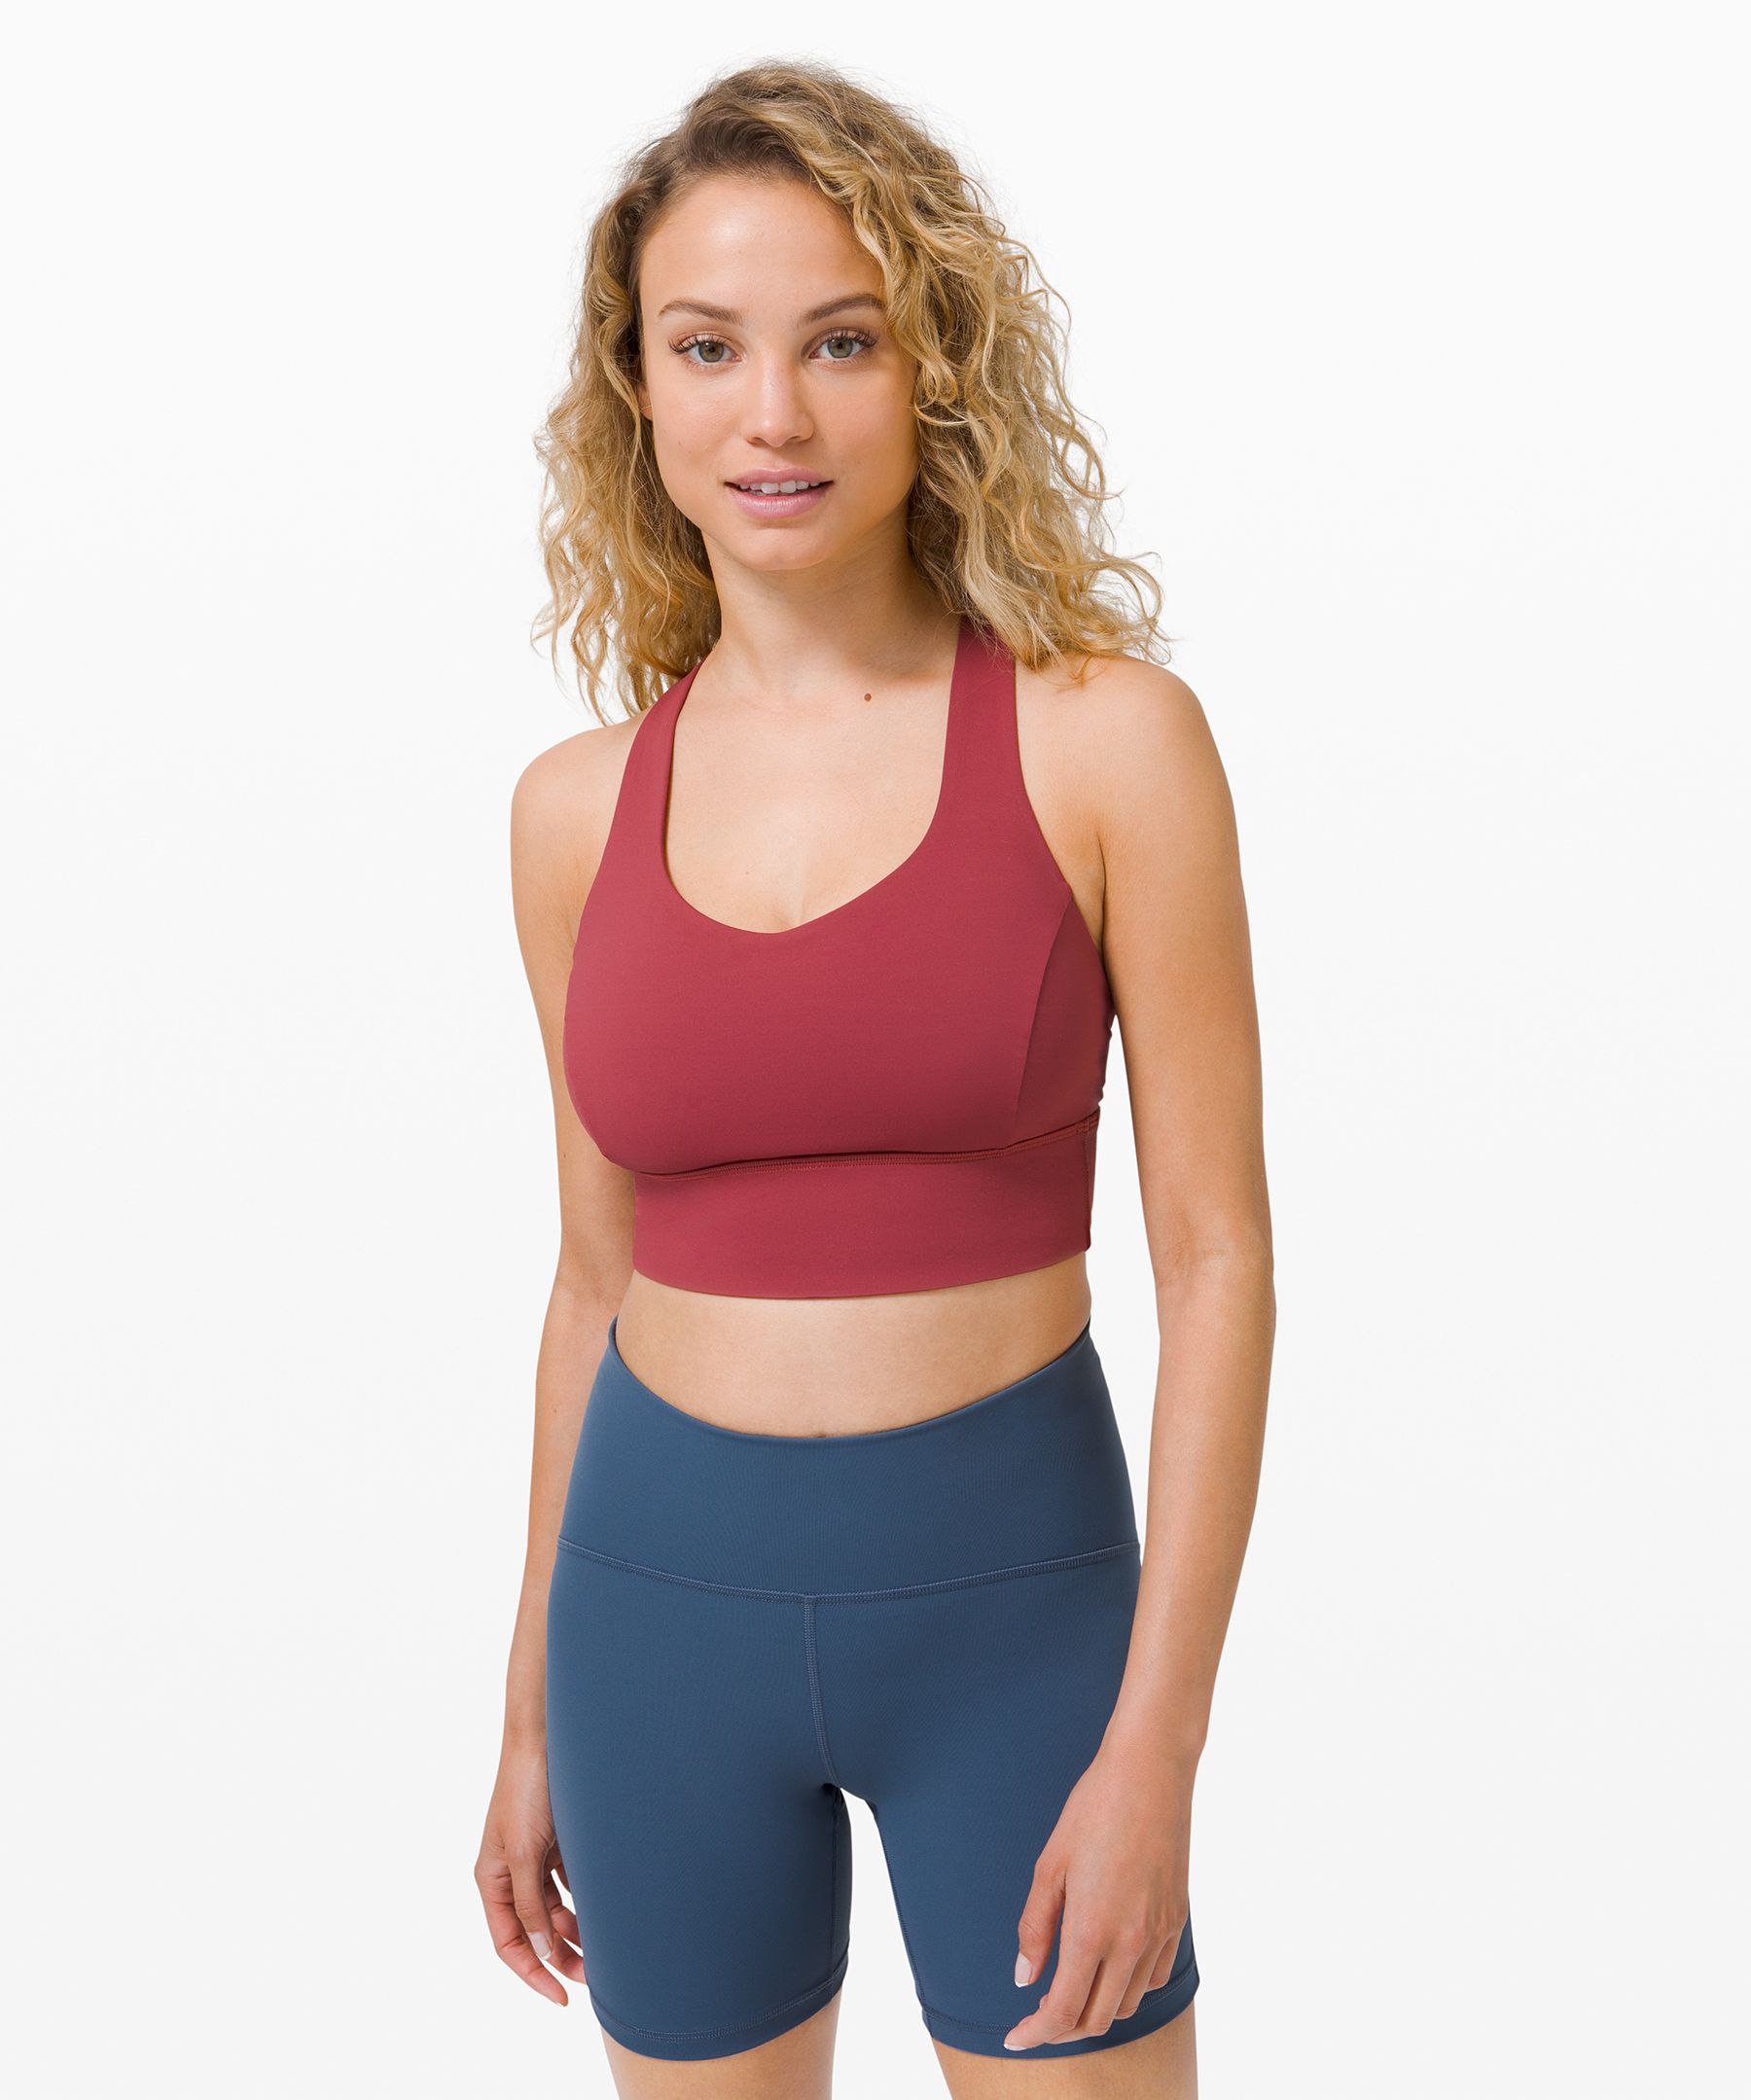 Free to Be Serene Longline Bra Light Support, C/D Cup *Online Only